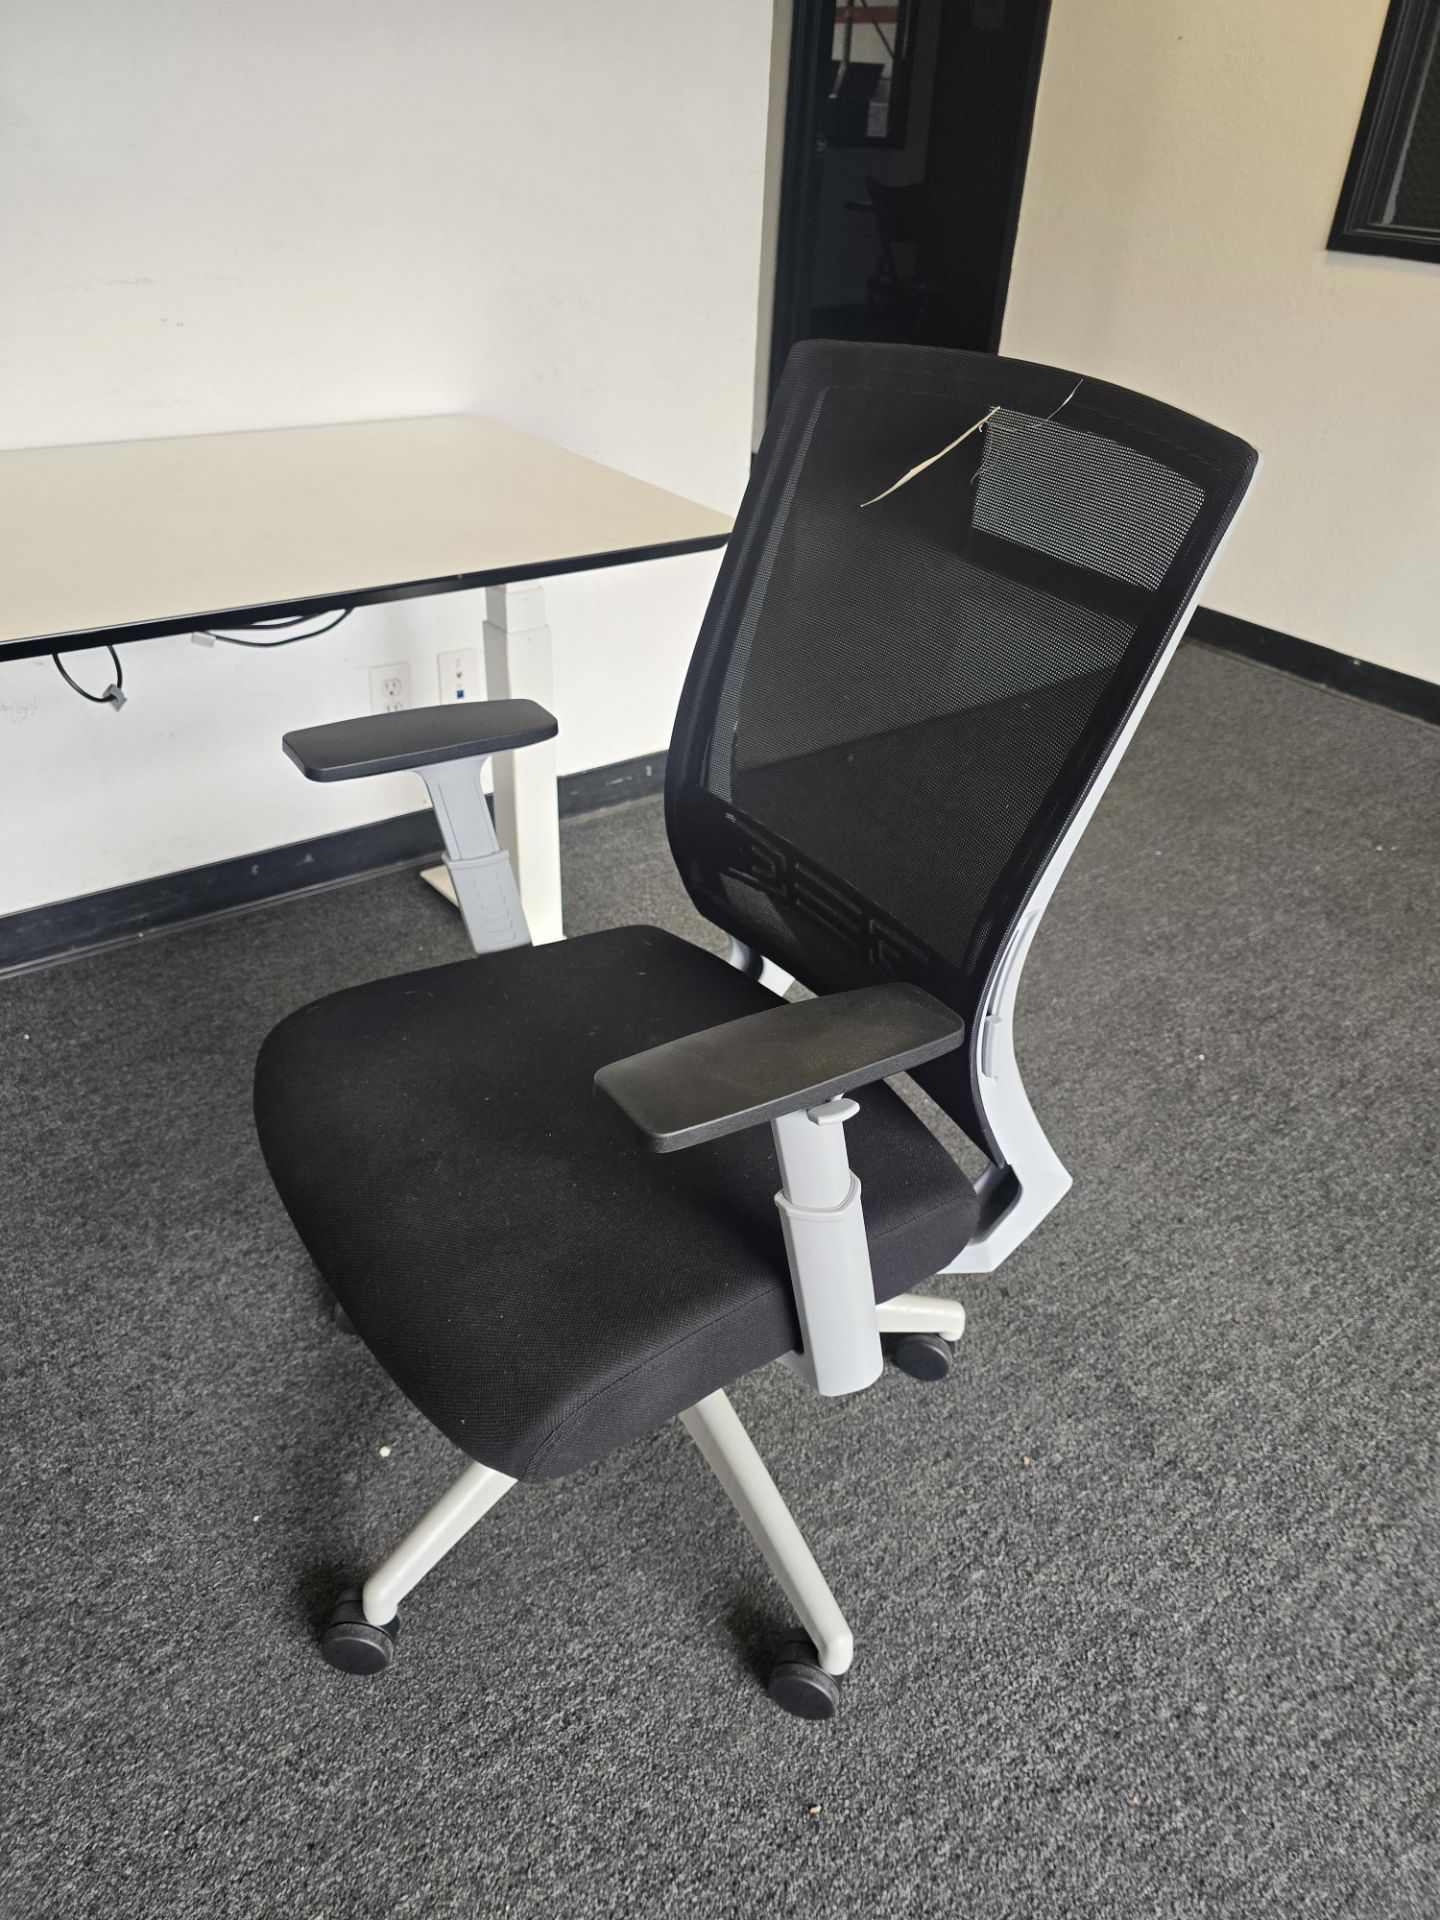 BLACK & GRAY OFFICE CHAIR - Image 2 of 2